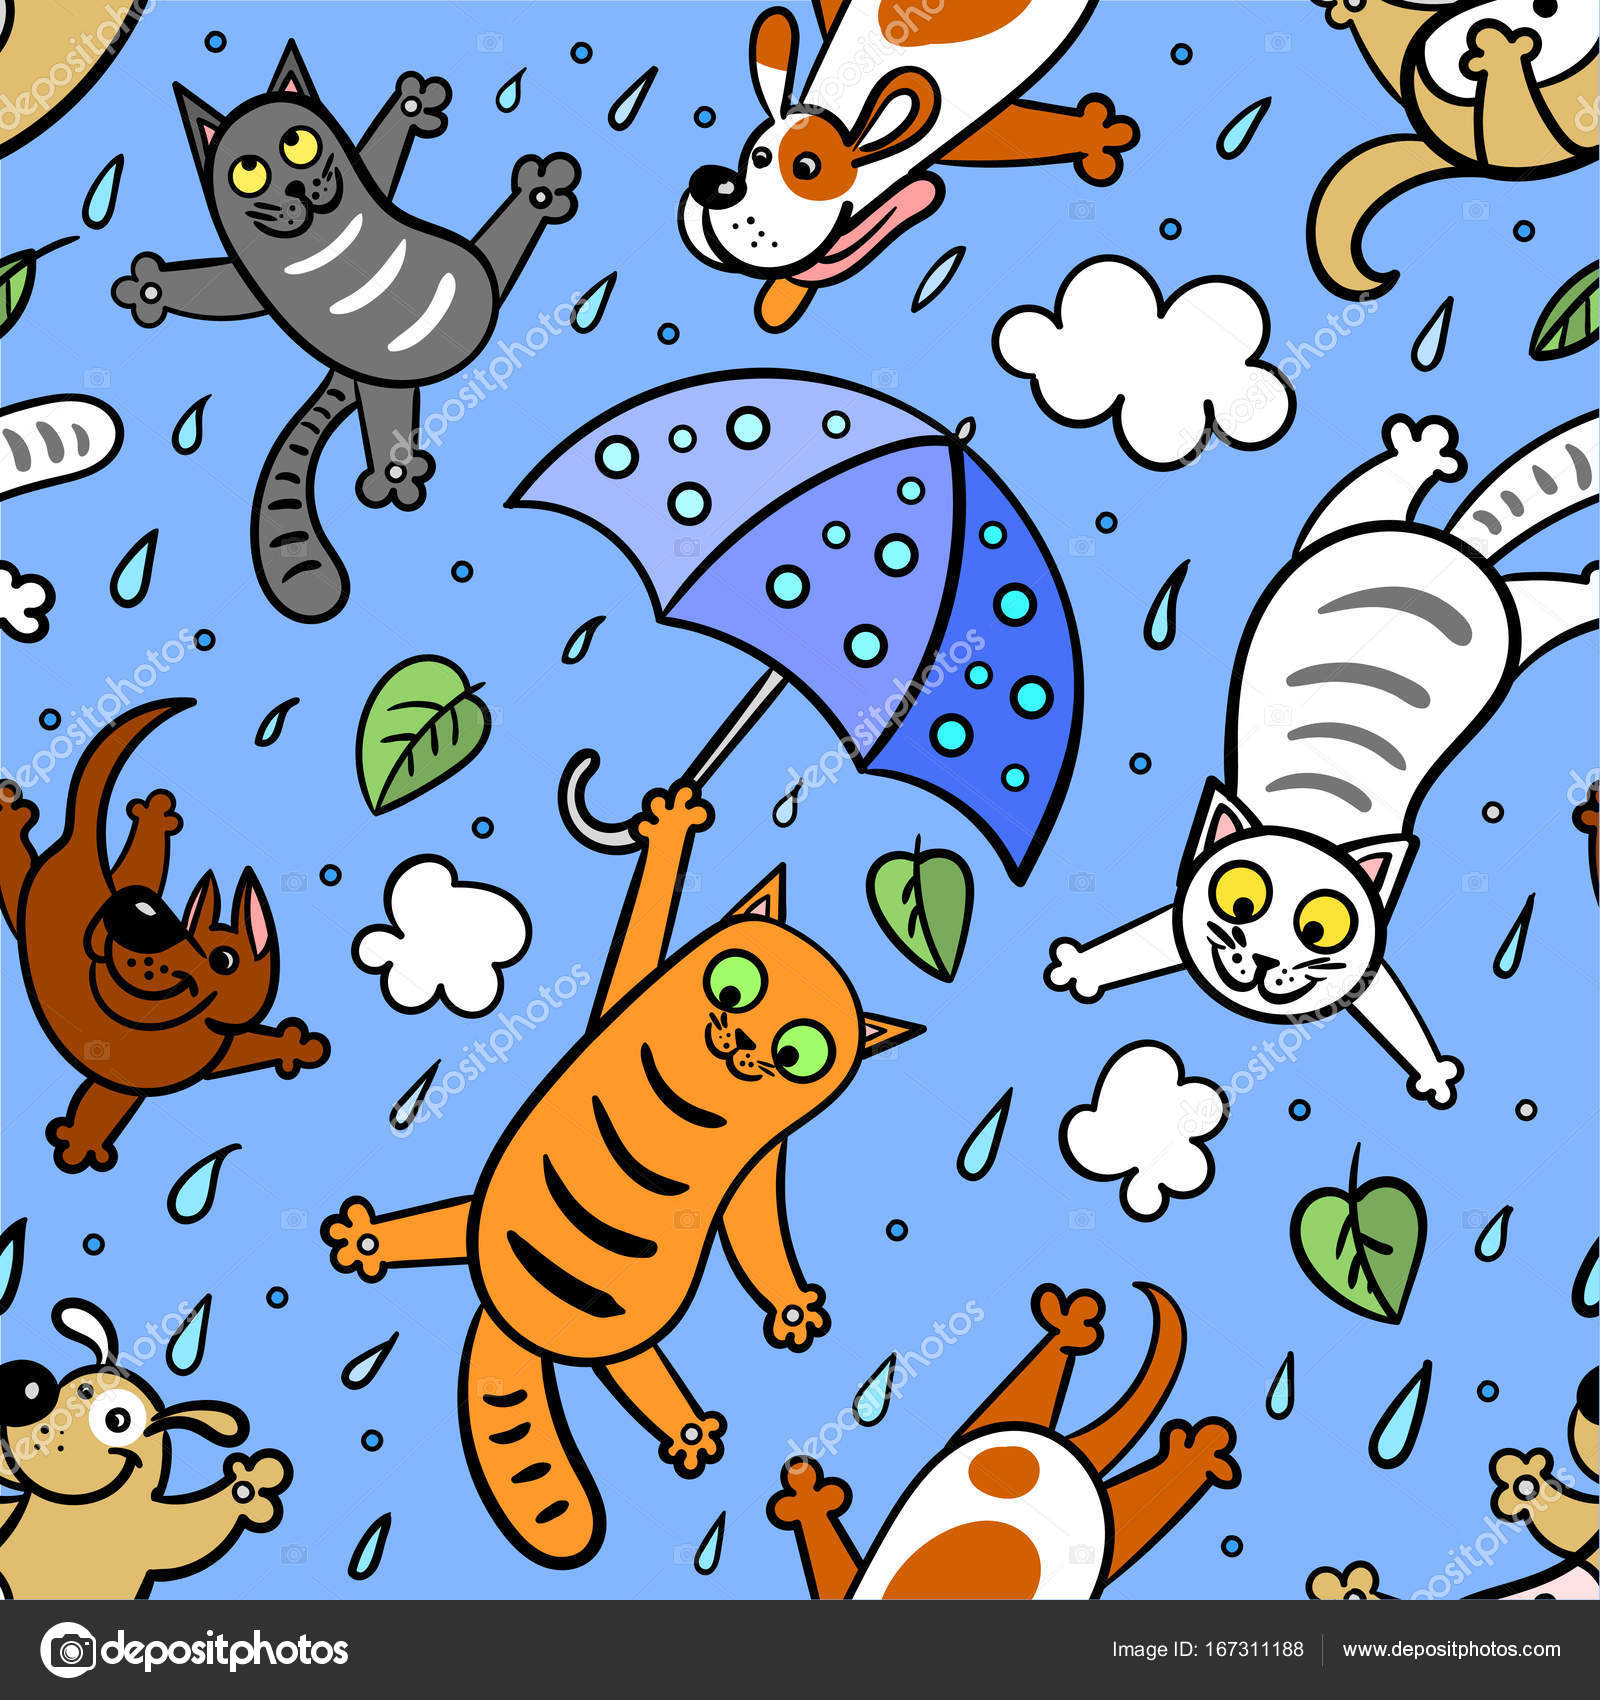 Image result for raining cats and dogs cartoon